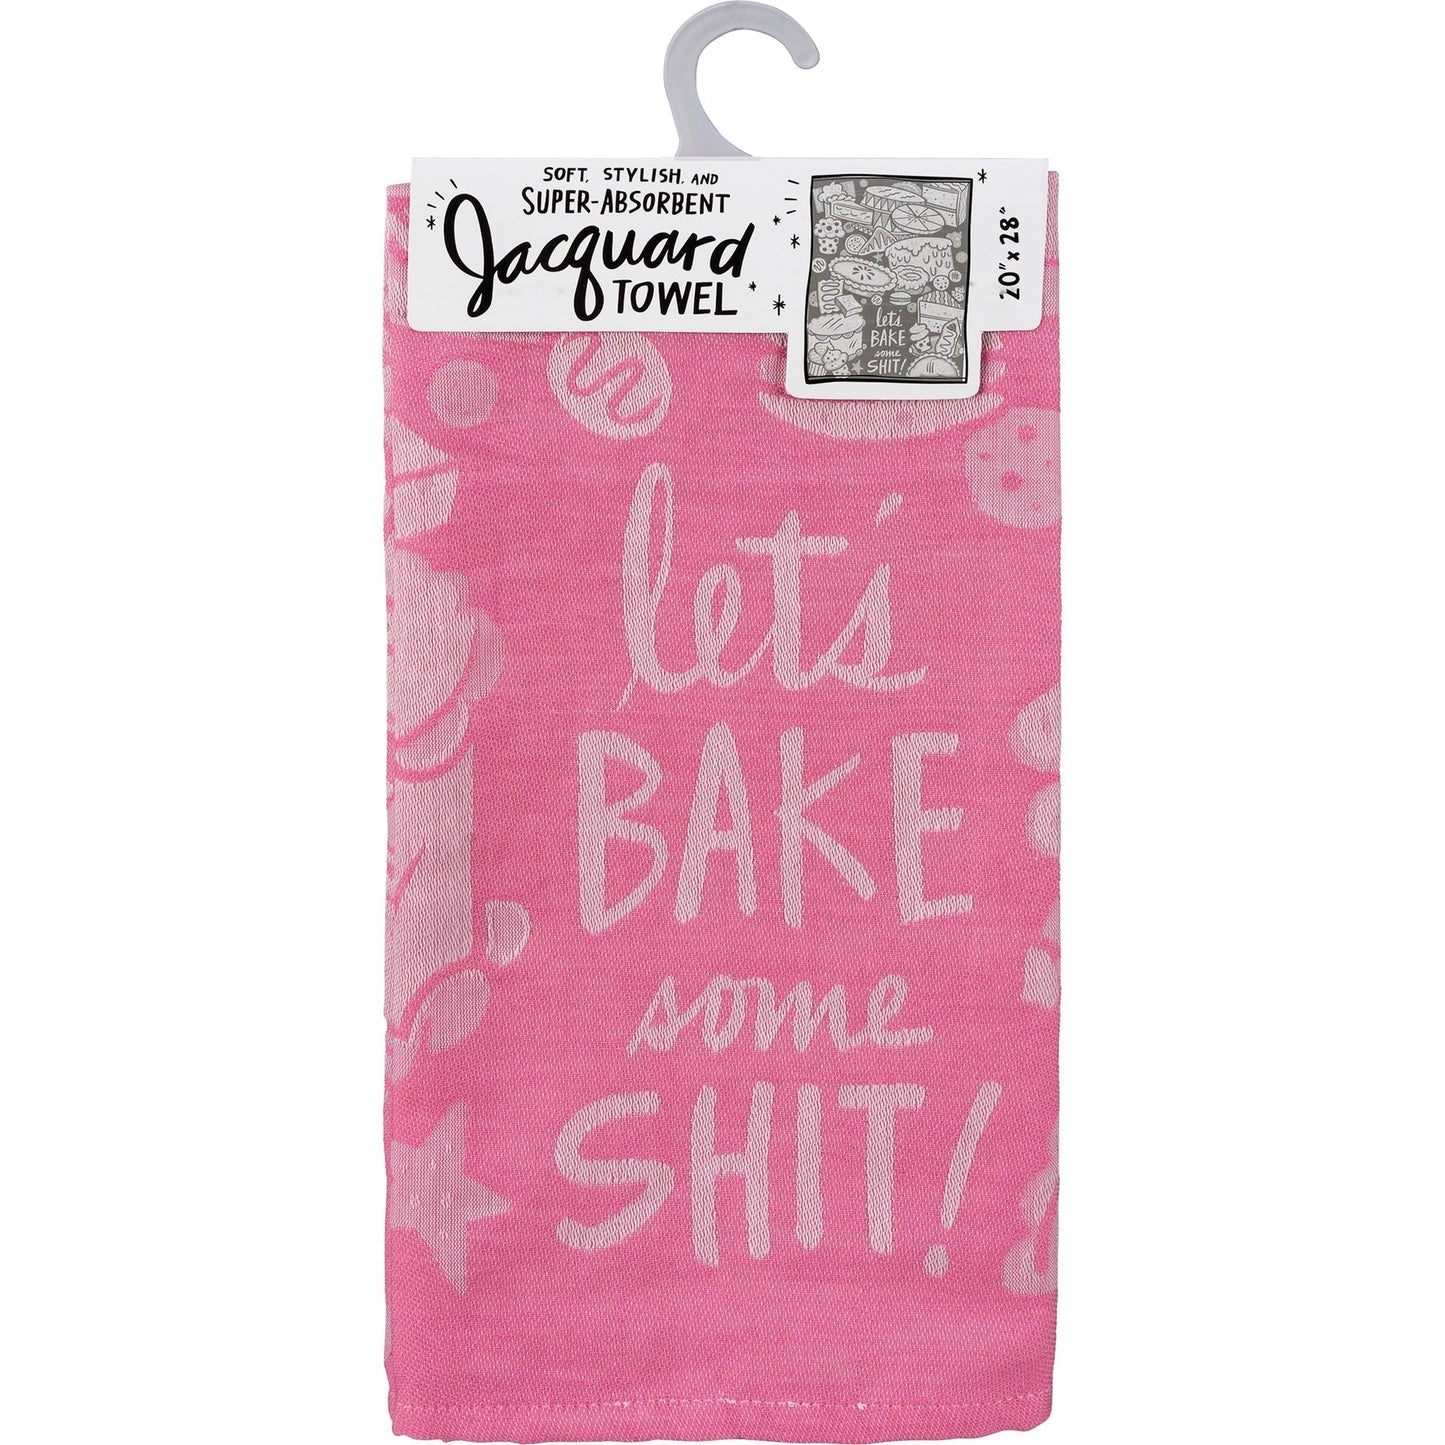 Let's Bake Some Shit Woven Pink Funny Snarky Dish Cloth Towel